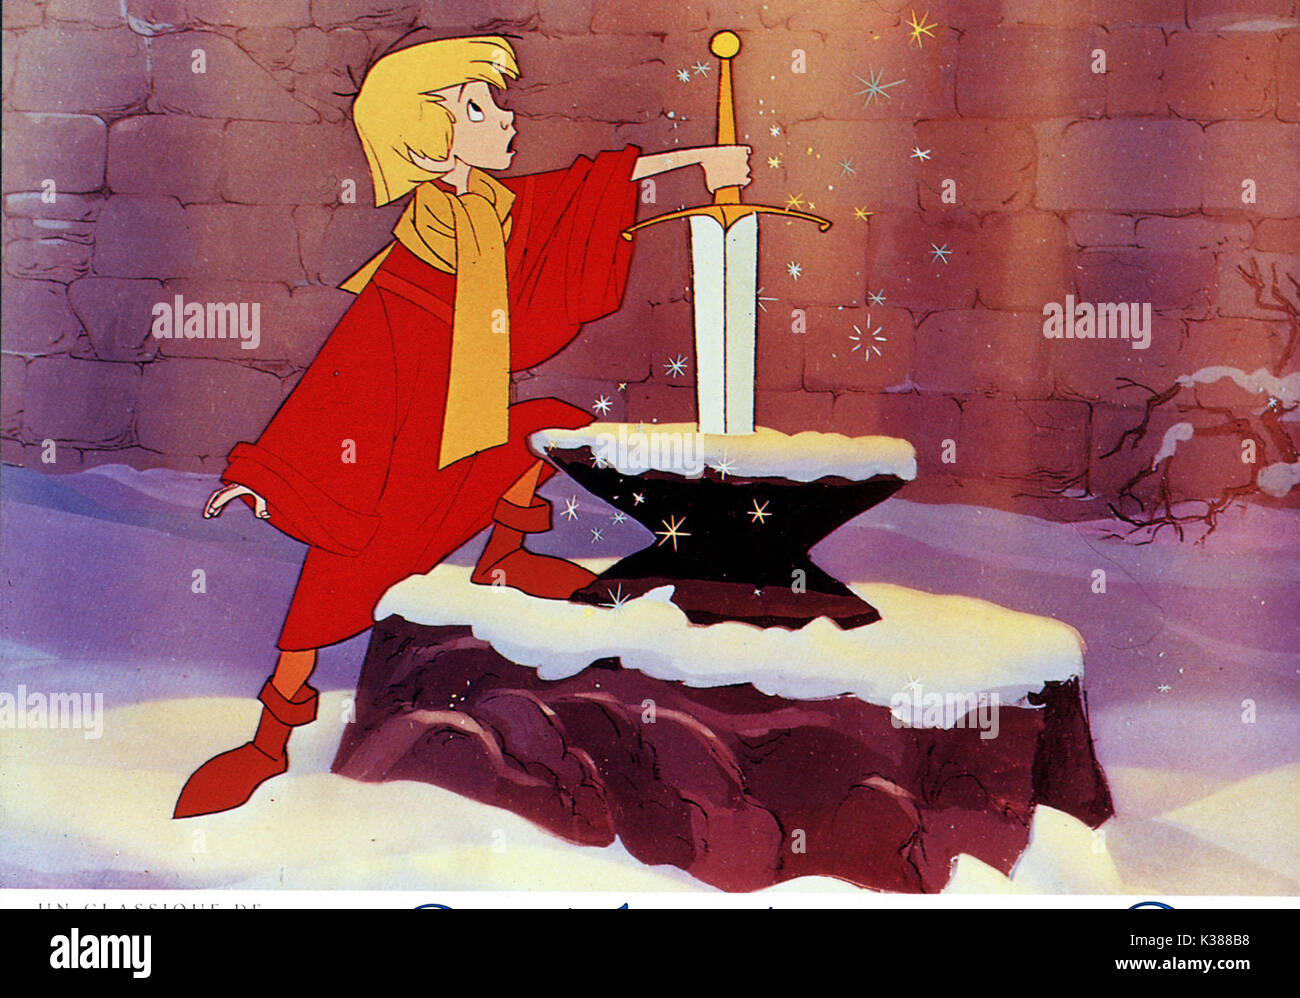 SWORD IN THE STONE WART AND MERLIN PLEASE CREDIT DISNEY     Date: 1963 Stock Photo